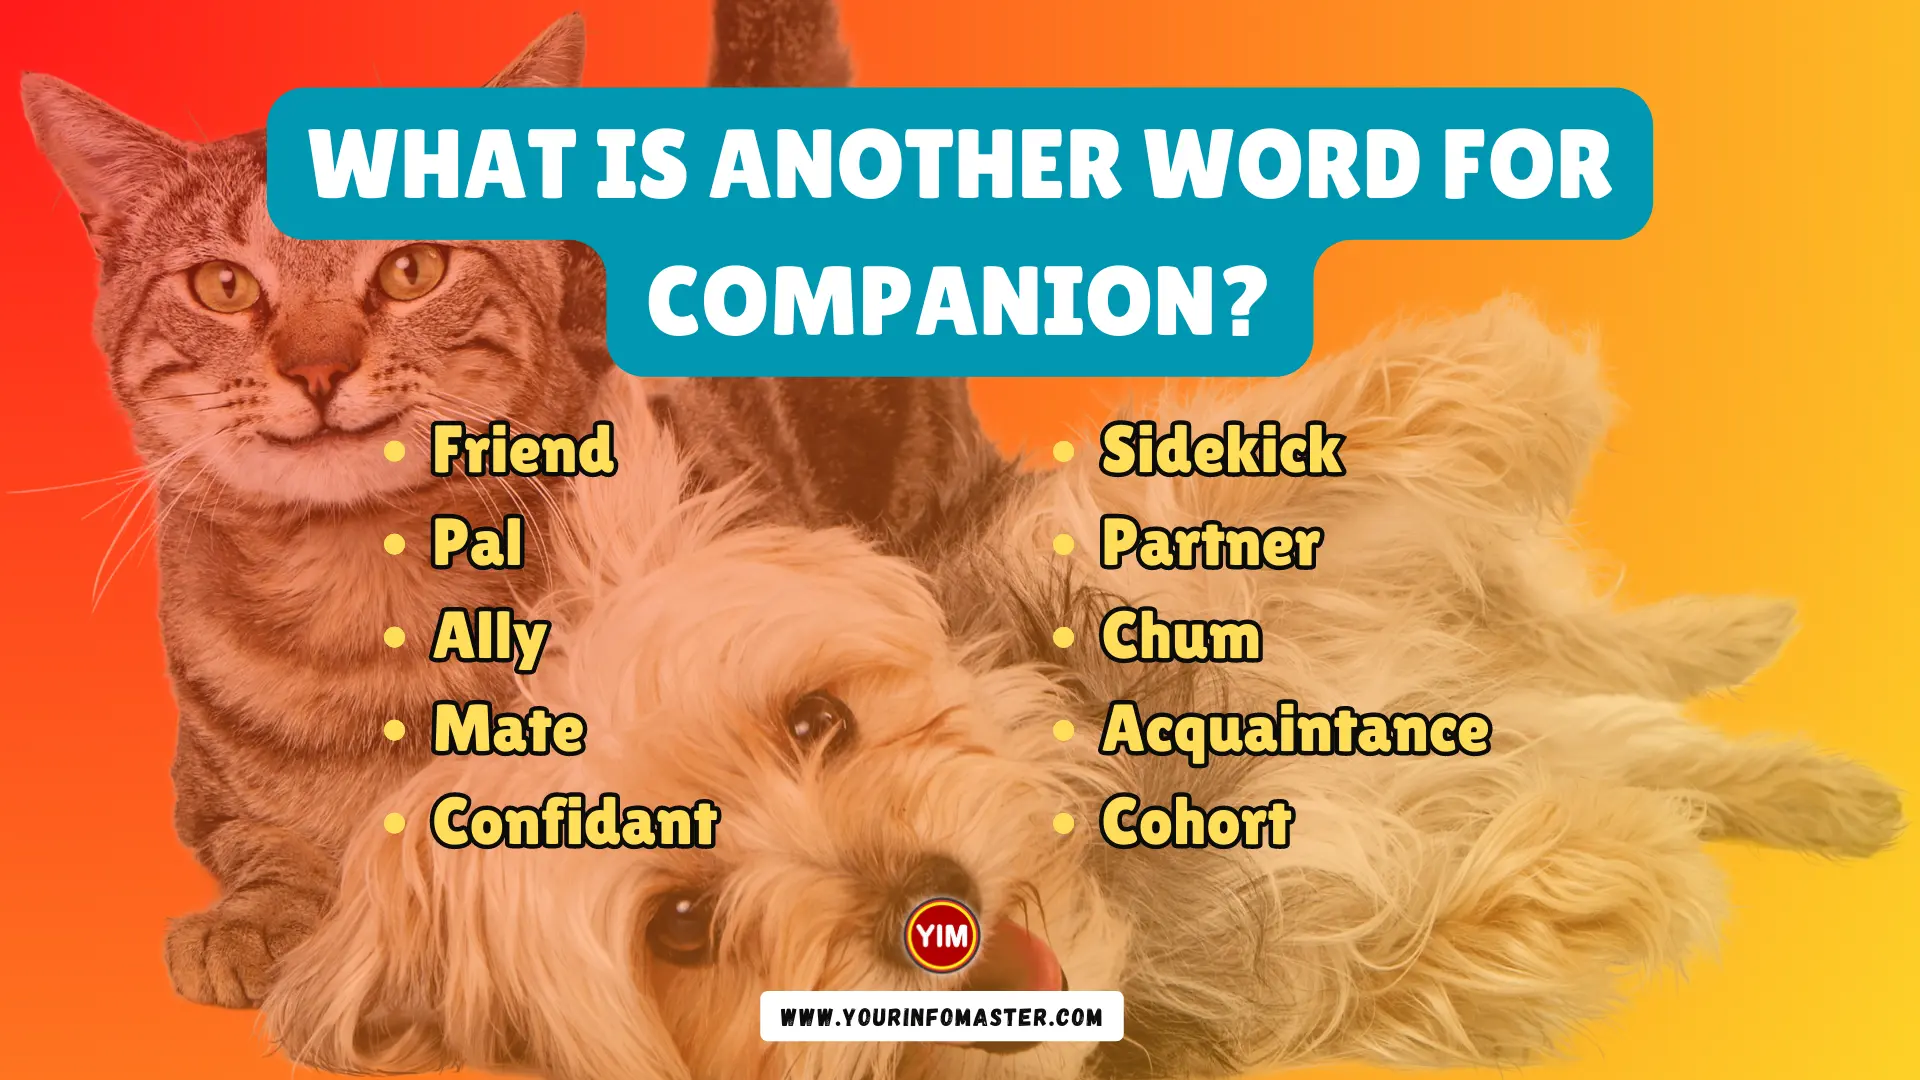 What is another word for Companion